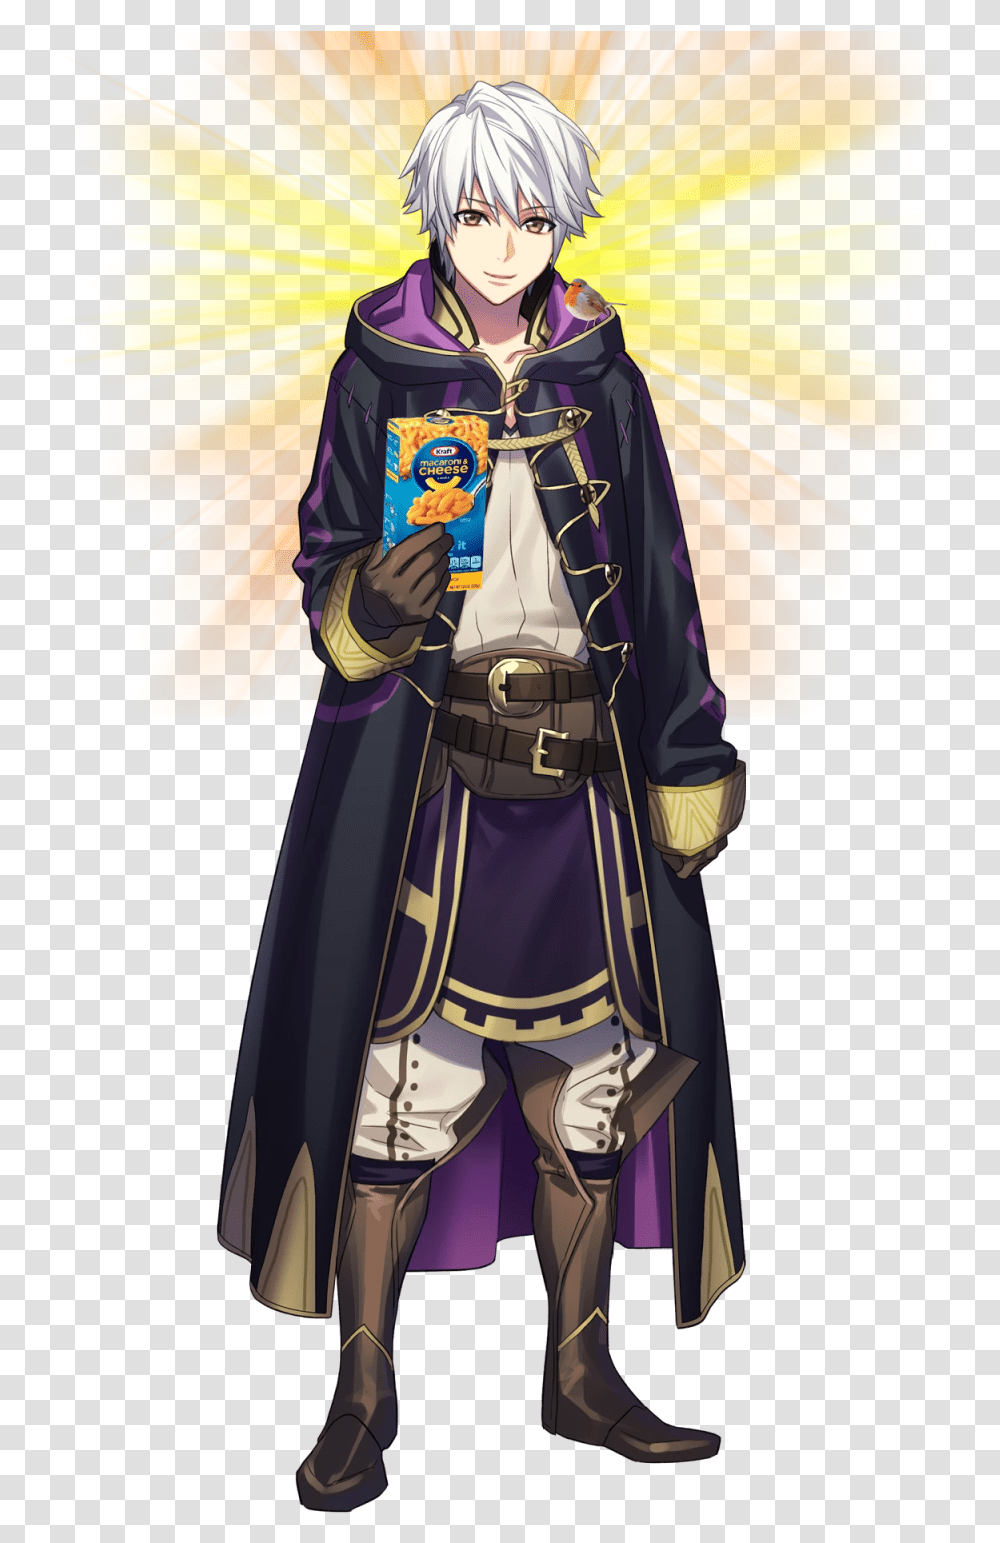 Download Biggie Cheese Image Fire Emblem Heroes Male Robin, Costume, Clothing, Person, Military Uniform Transparent Png